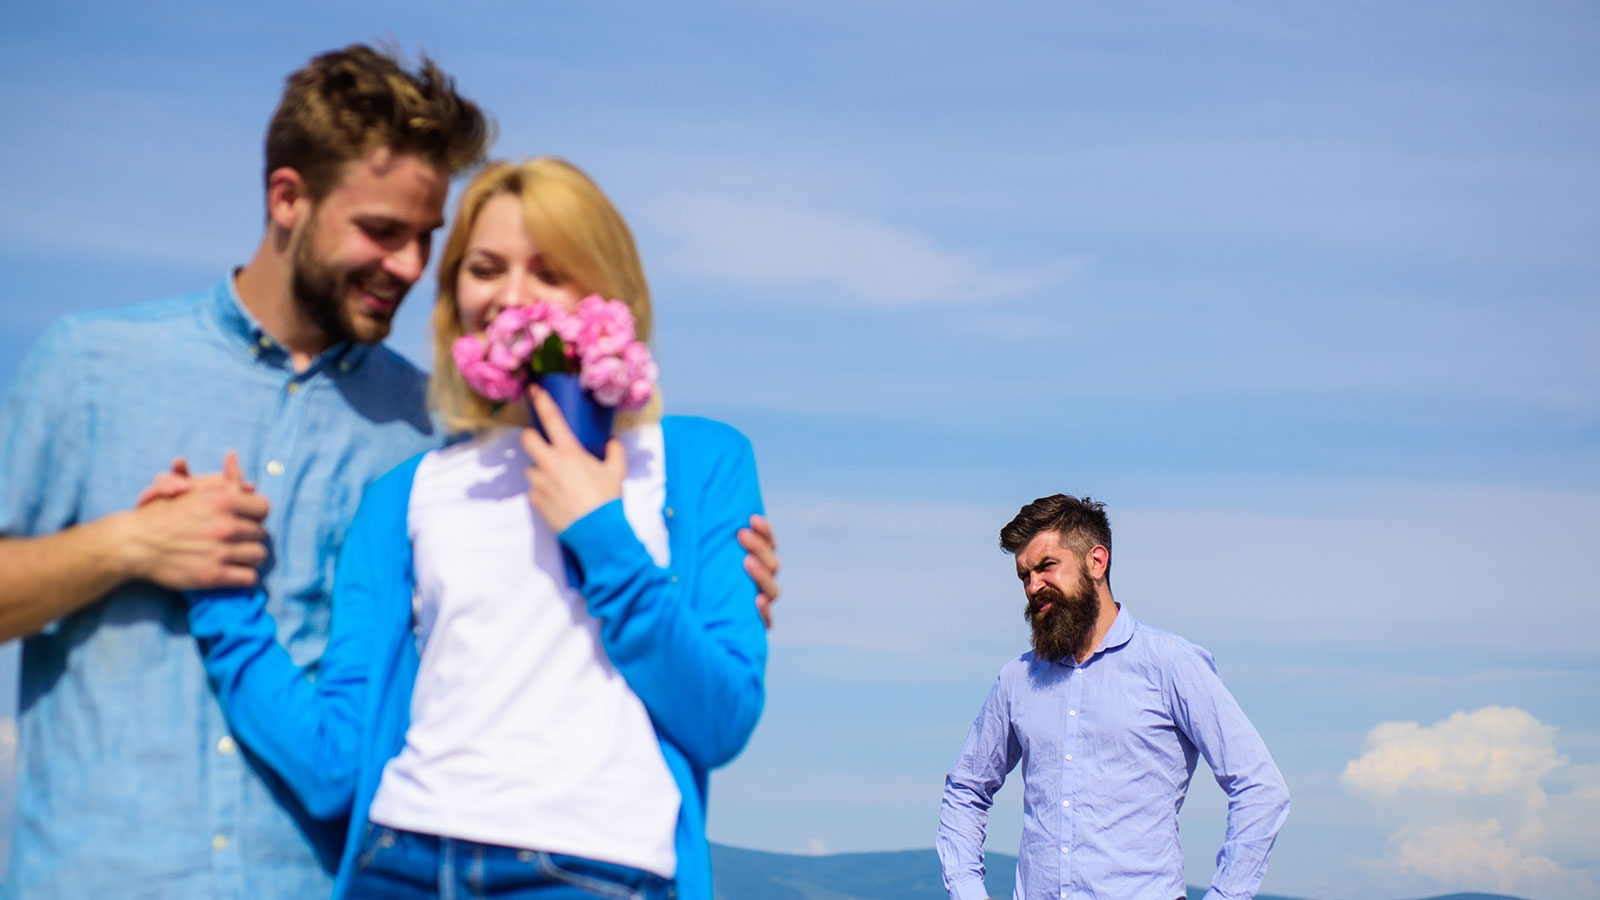 Is It Okay to Pursue a Relationship with a Friends Ex? ⋆ Colorado Marriage Retreats